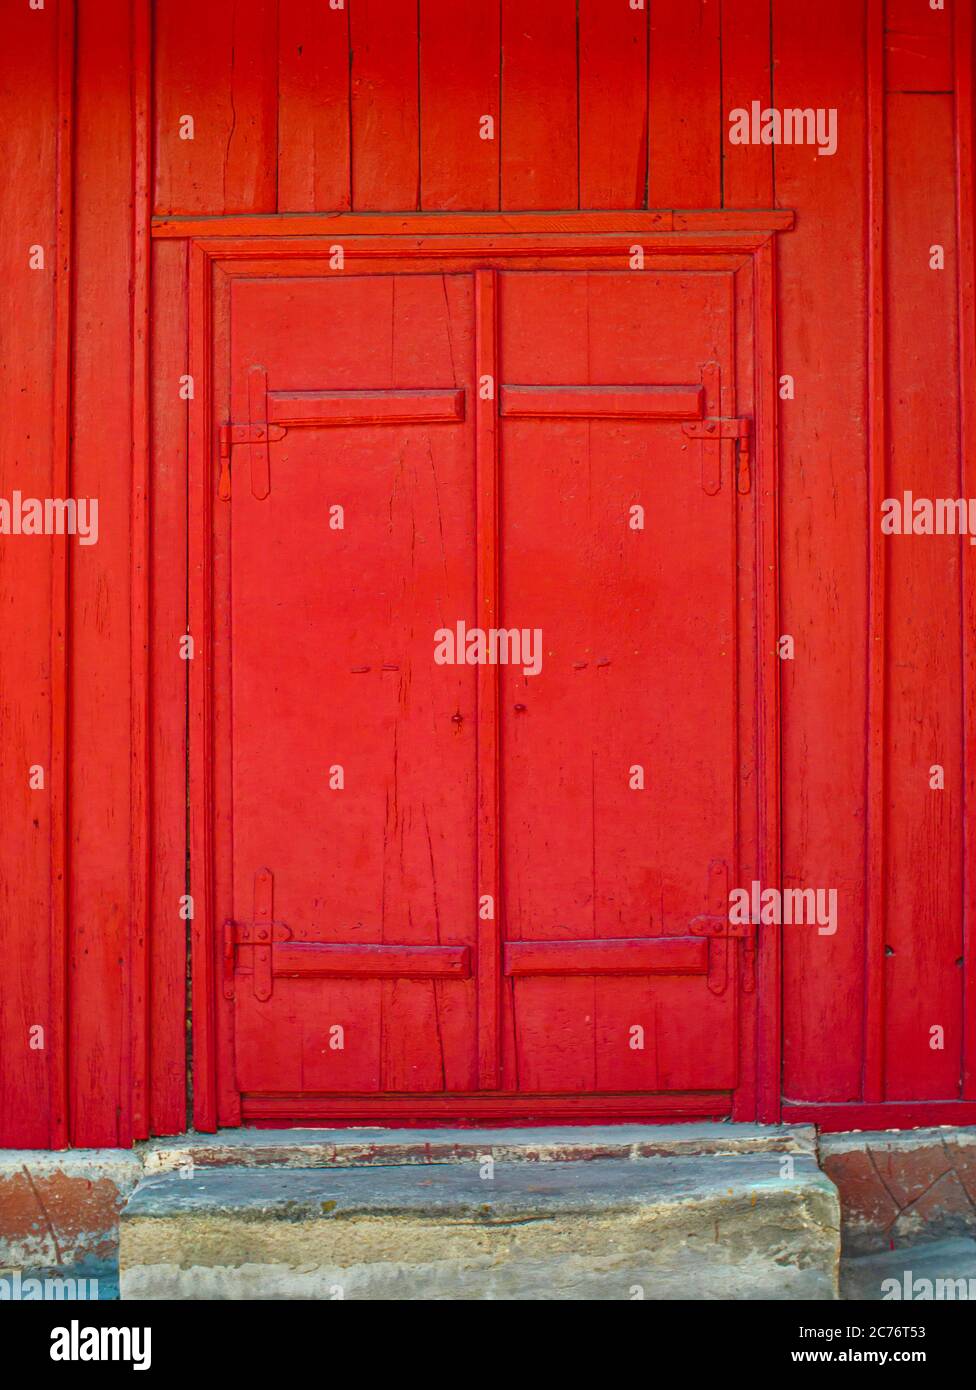 Old red door made of wood Stock Photo